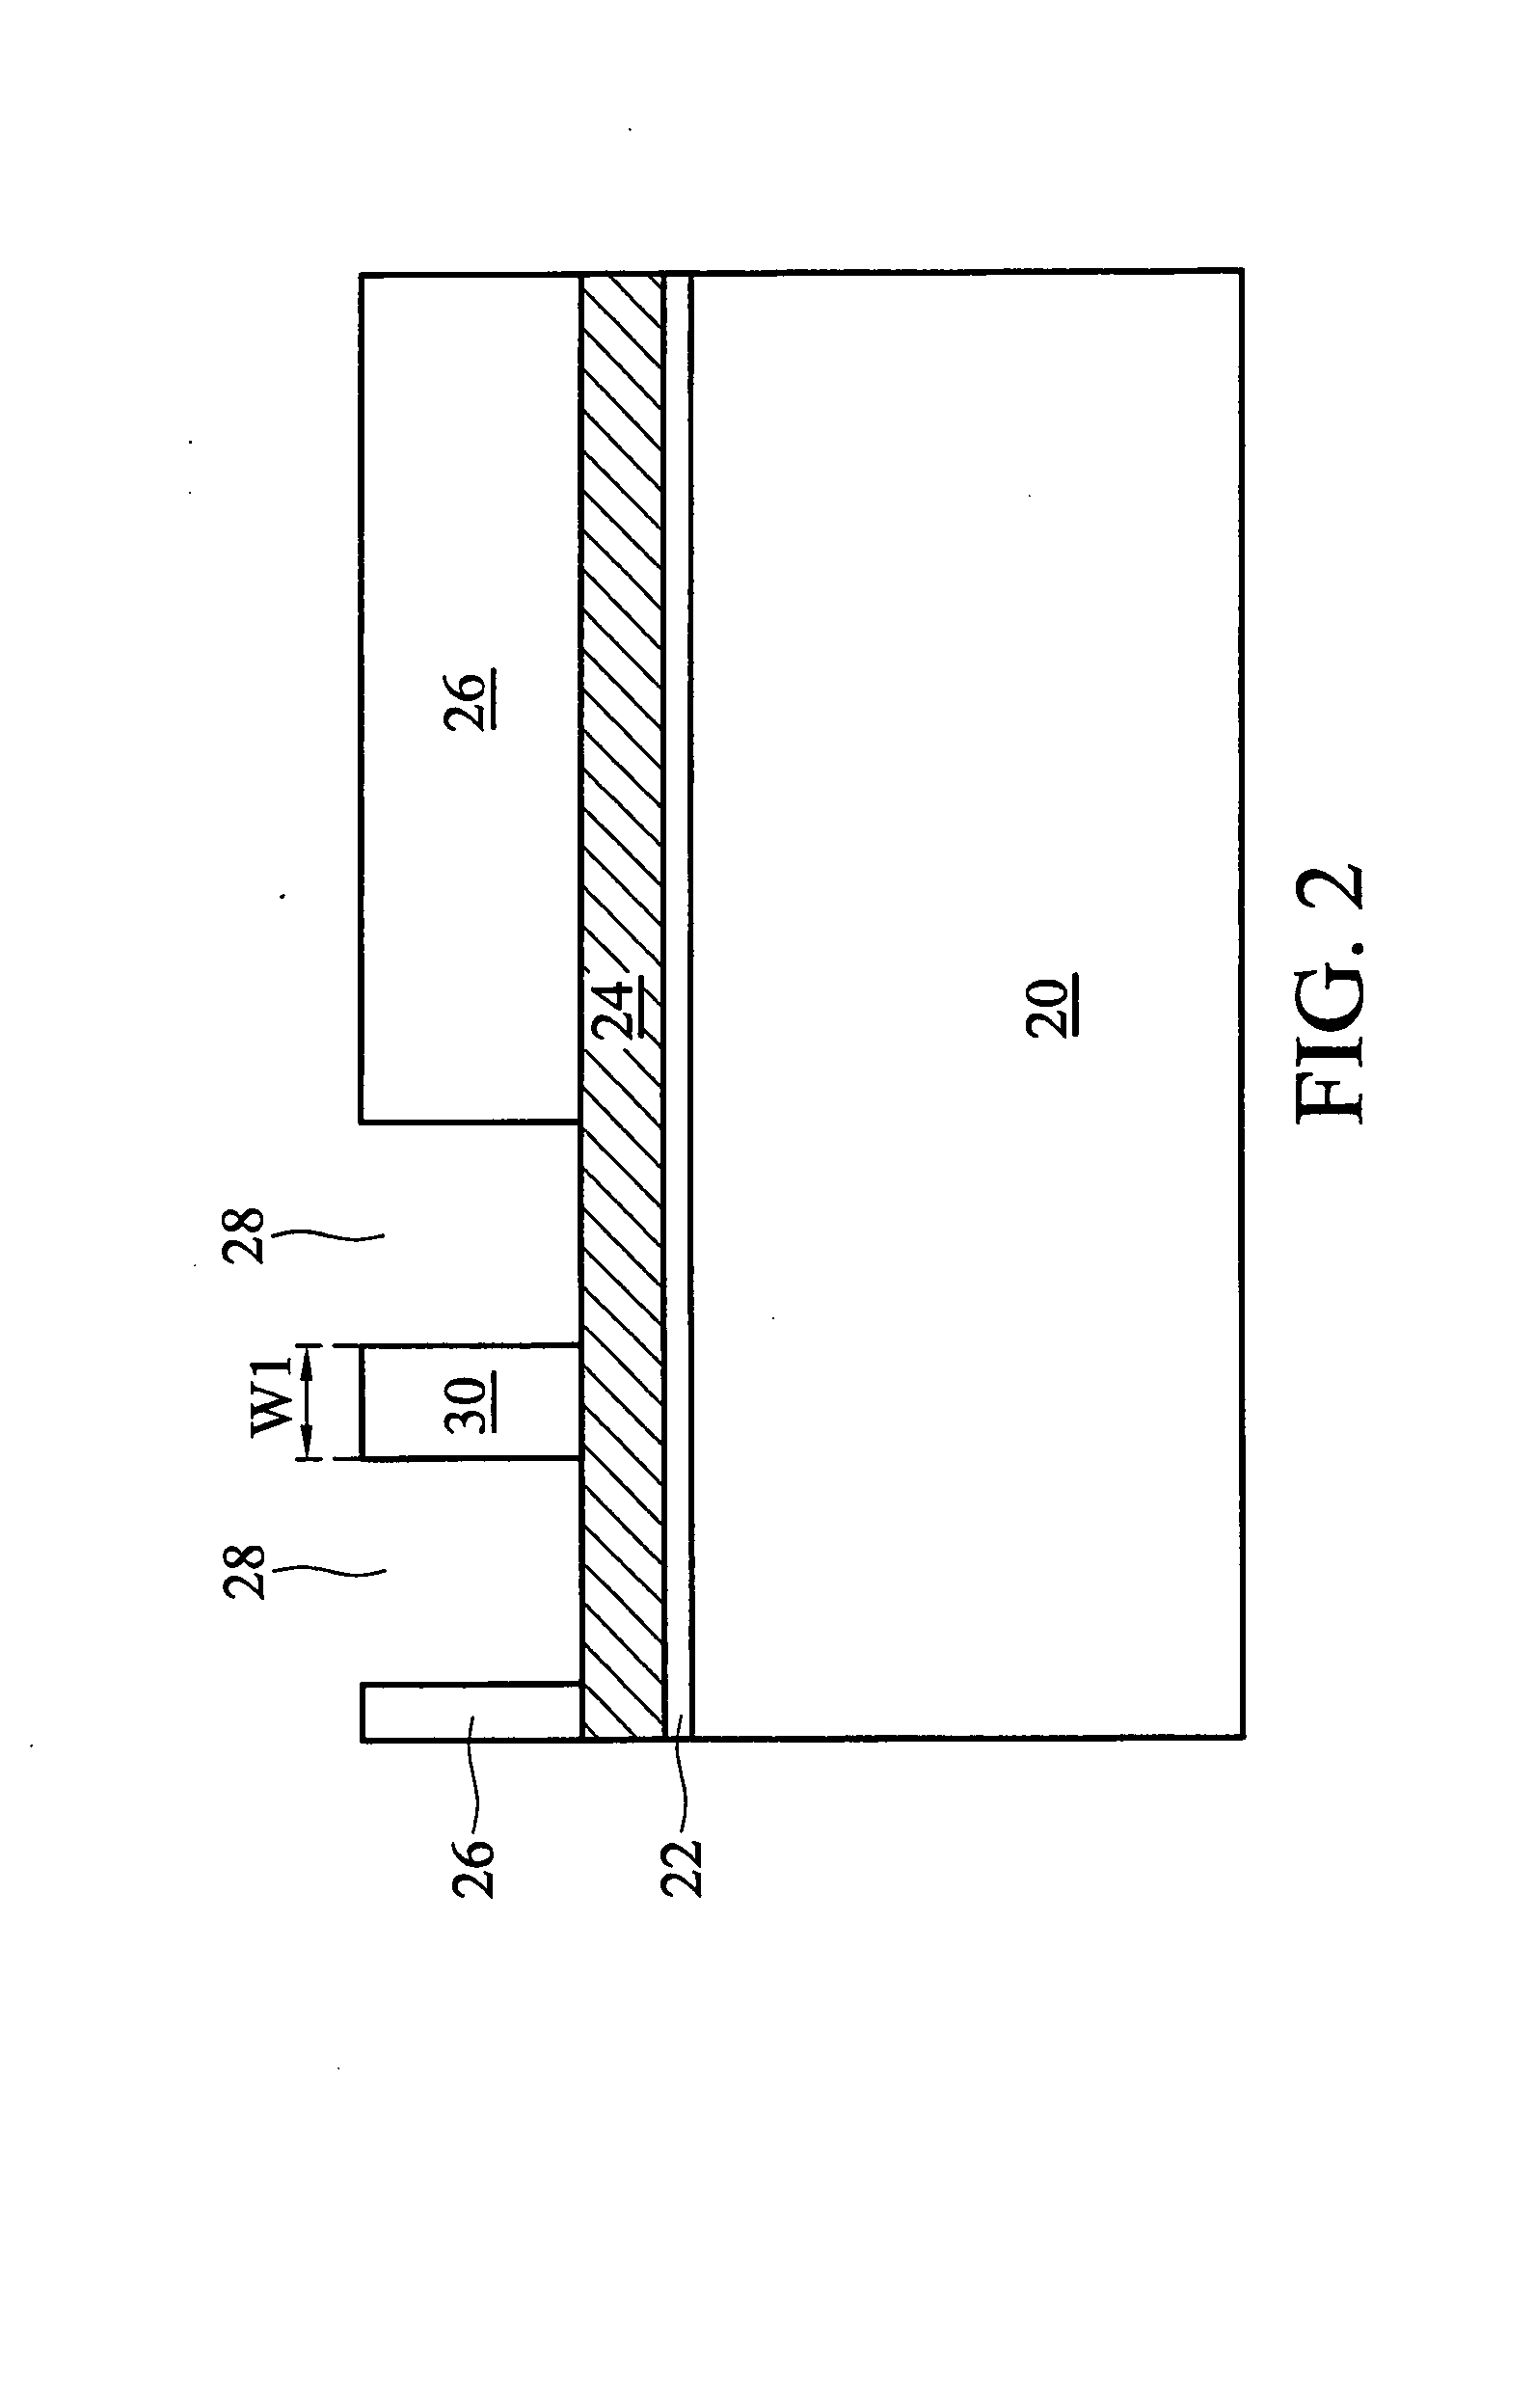 Fabrication of FinFETs with multiple fin heights